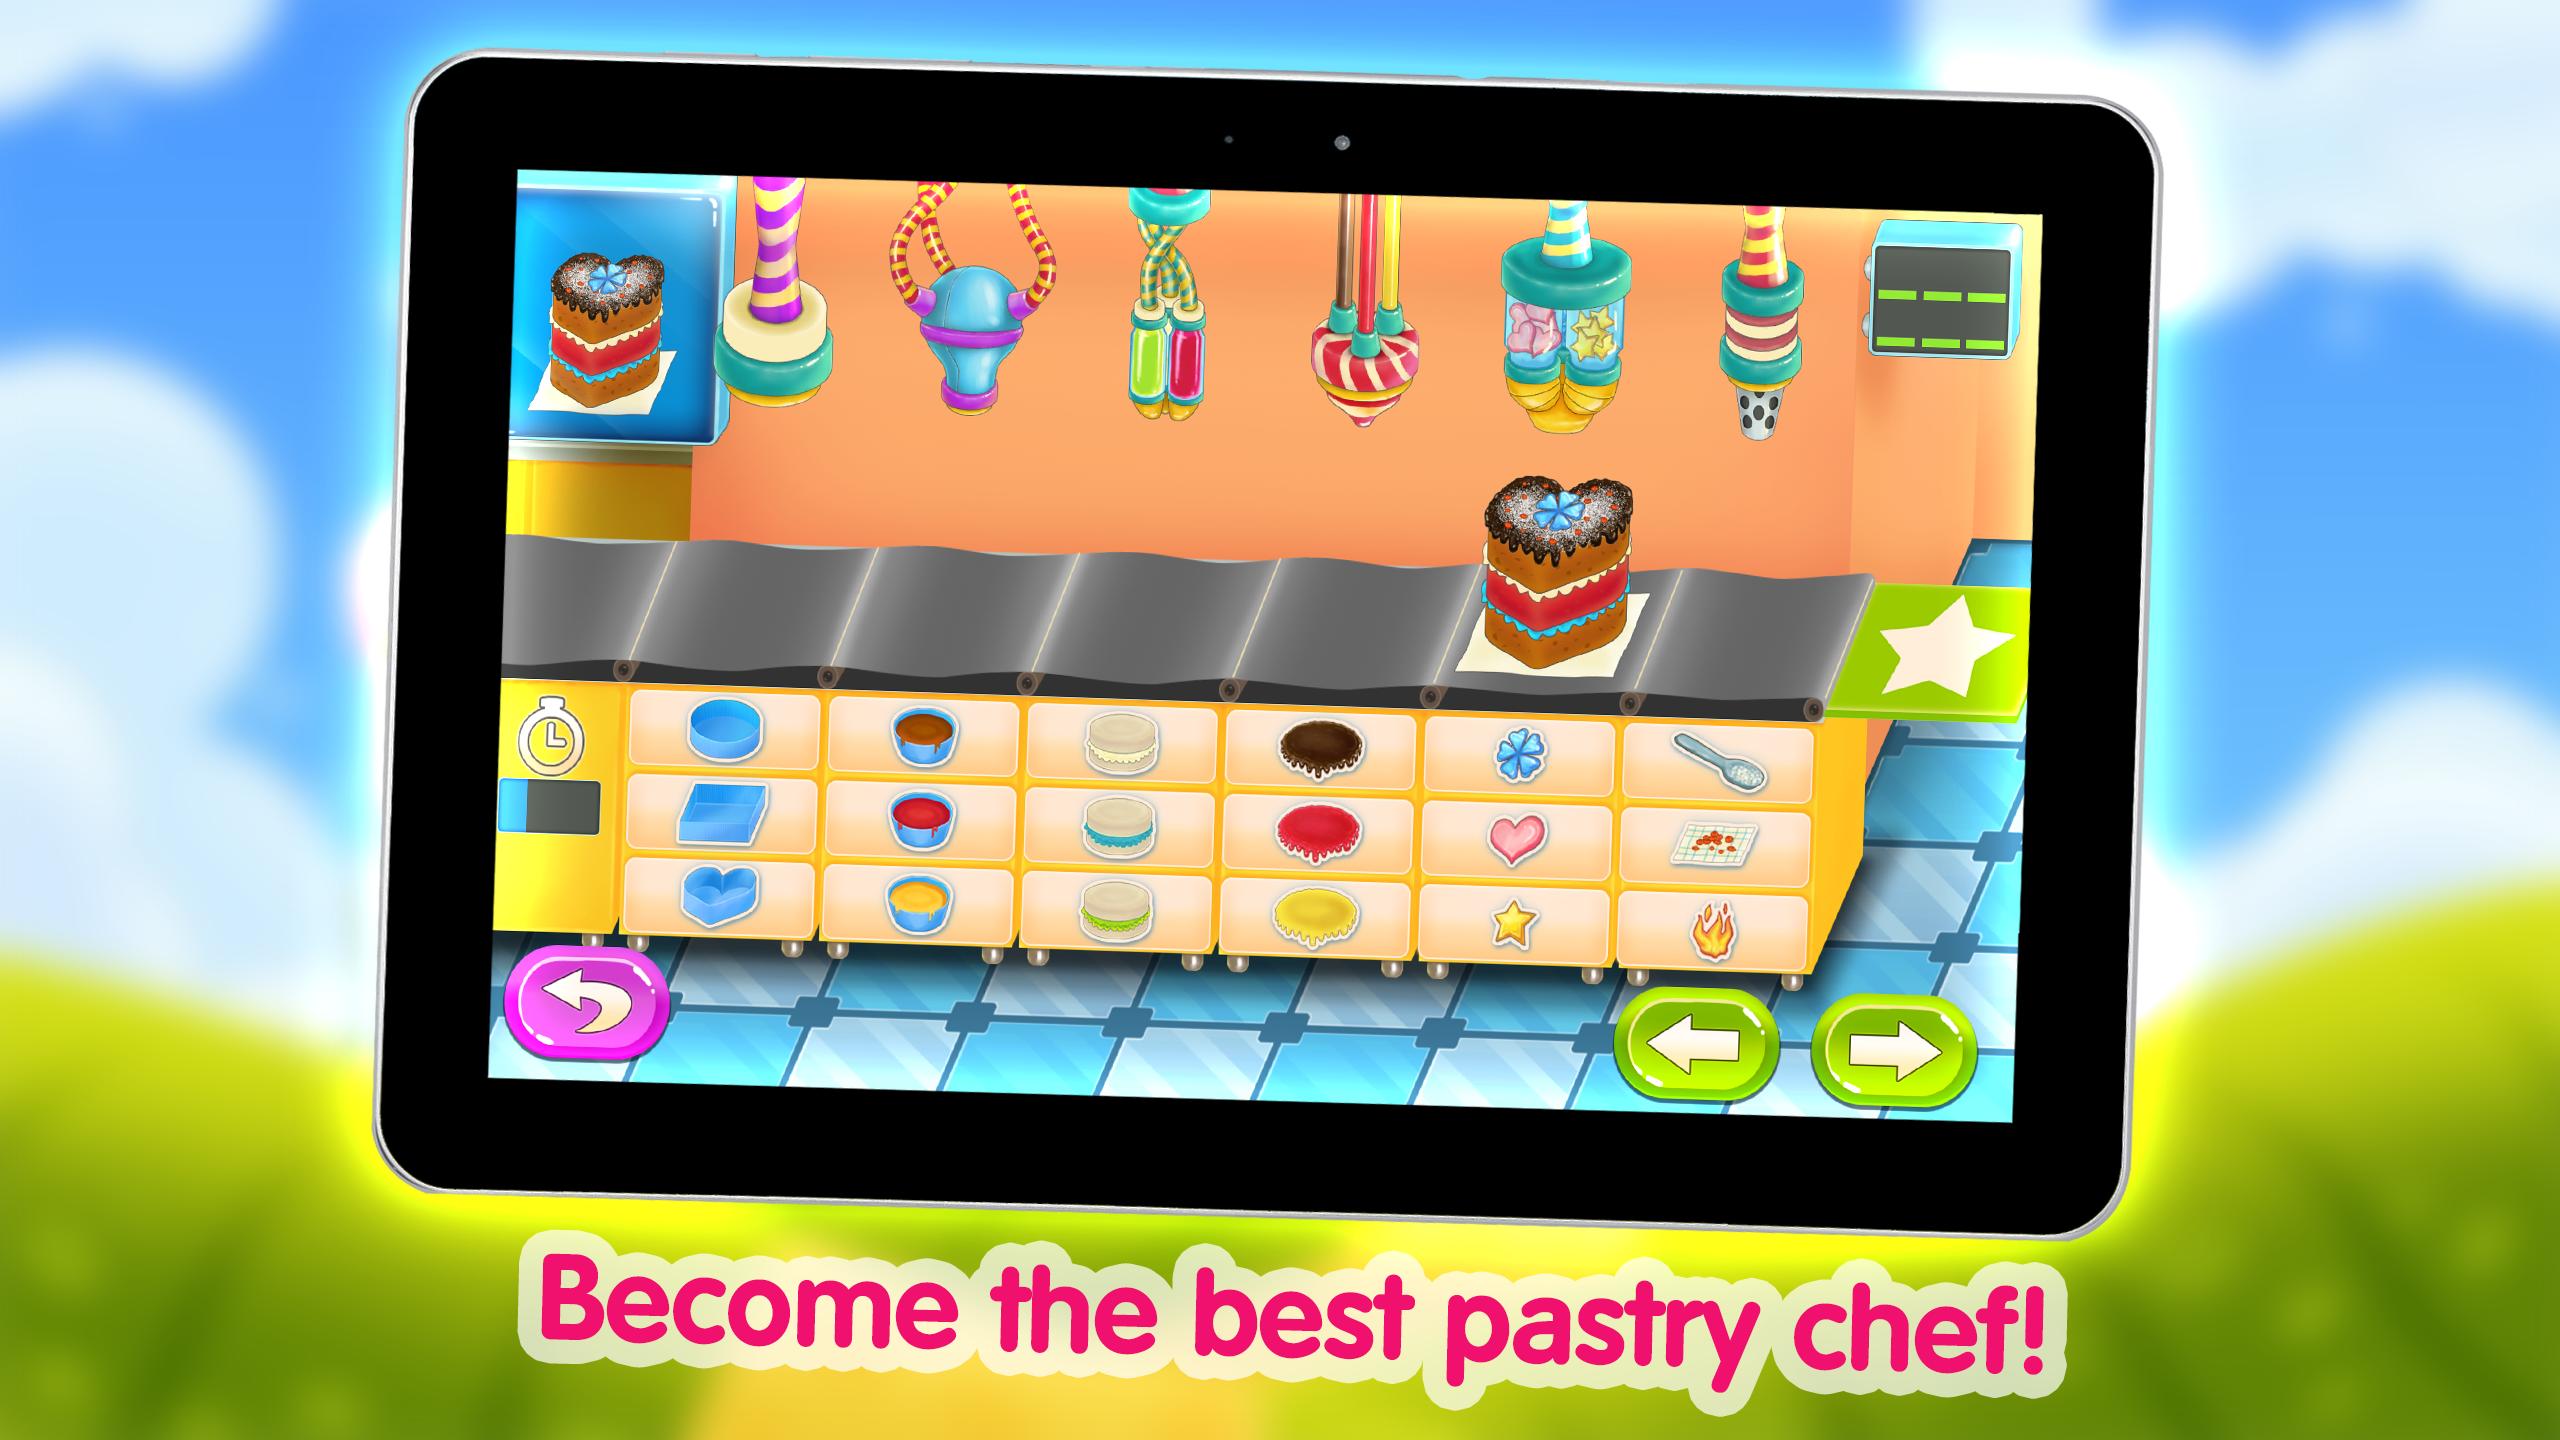 purble place purble place download free